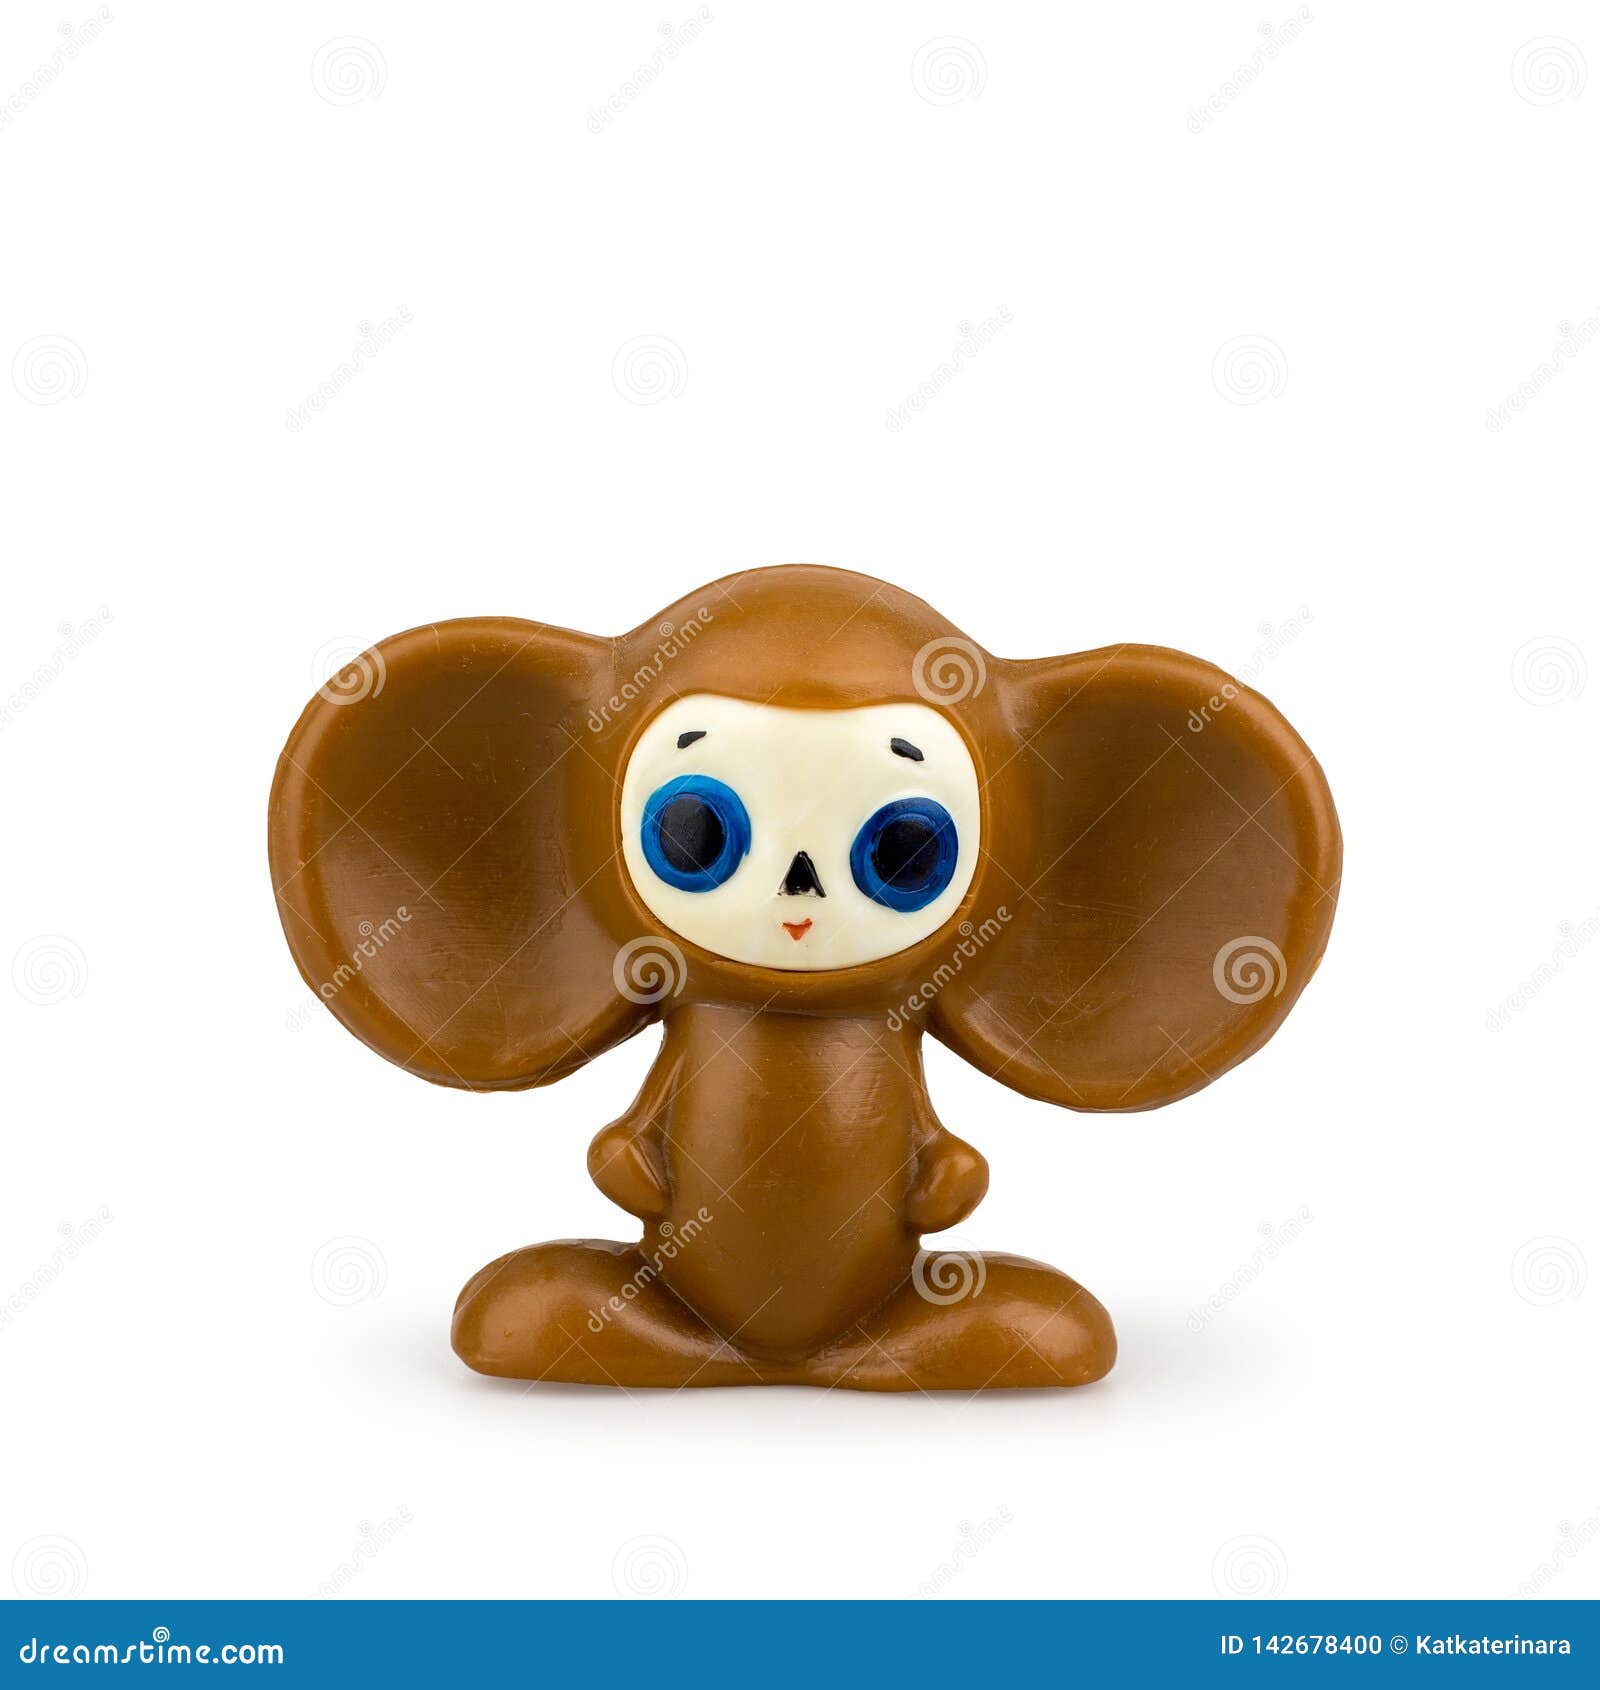 Baby Plush Toy Cheburashka With Big Ears On A Light Background Stock Photo,  Picture and Royalty Free Image. Image 16886910.